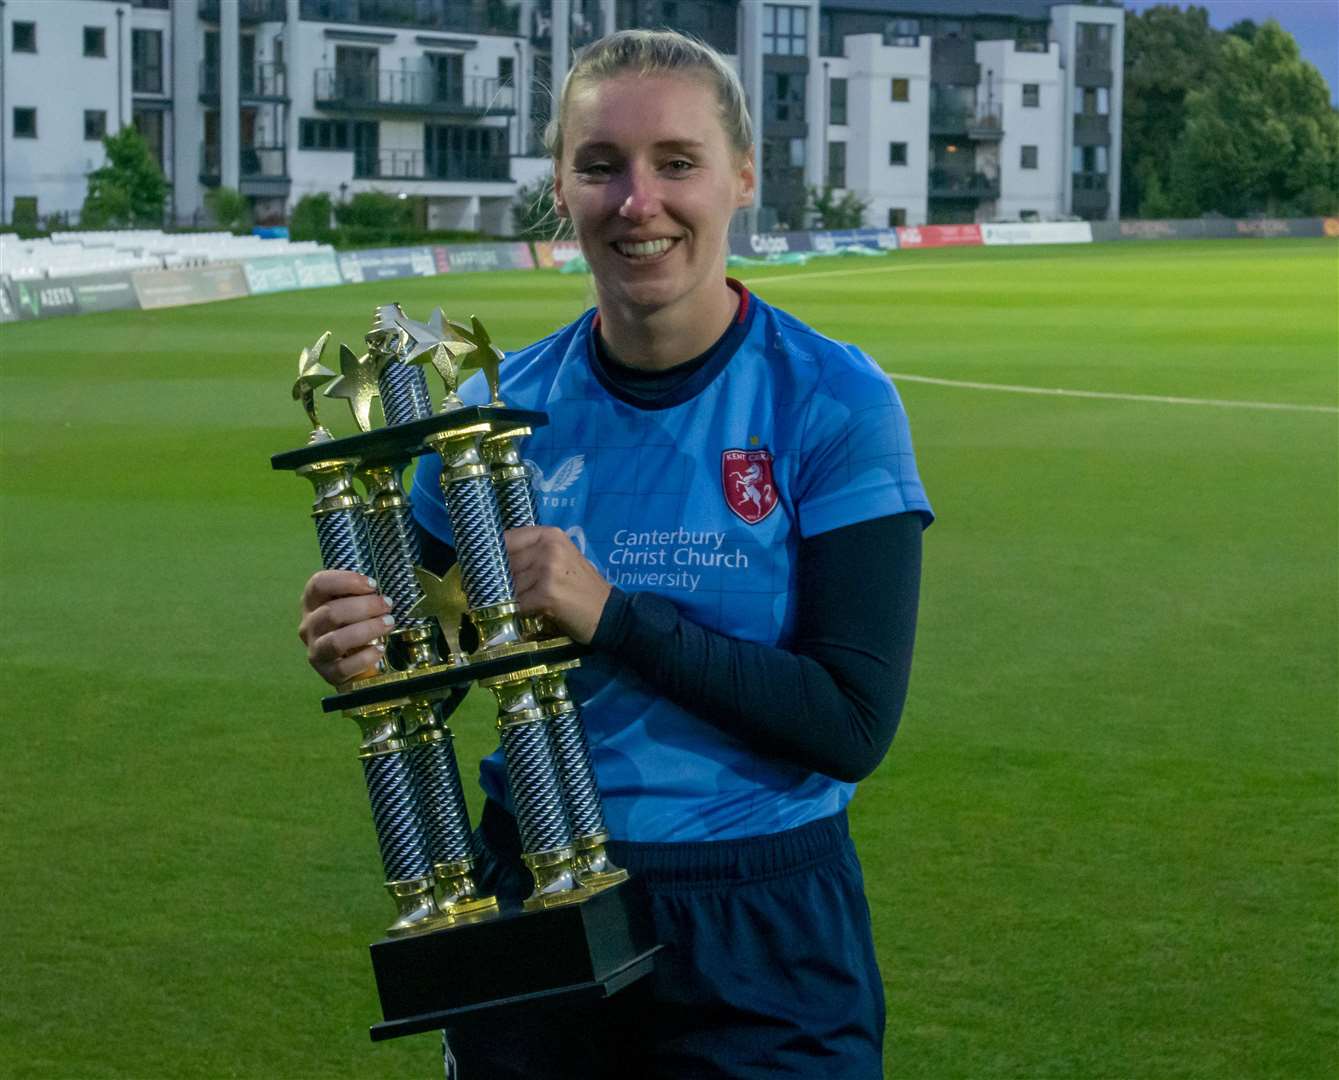 Megan Belt celebrates at Canterbury after Kent win the “Ladies Battle of the Bridge” against Essex. Picture: Kent Cricket / Ian Scammell